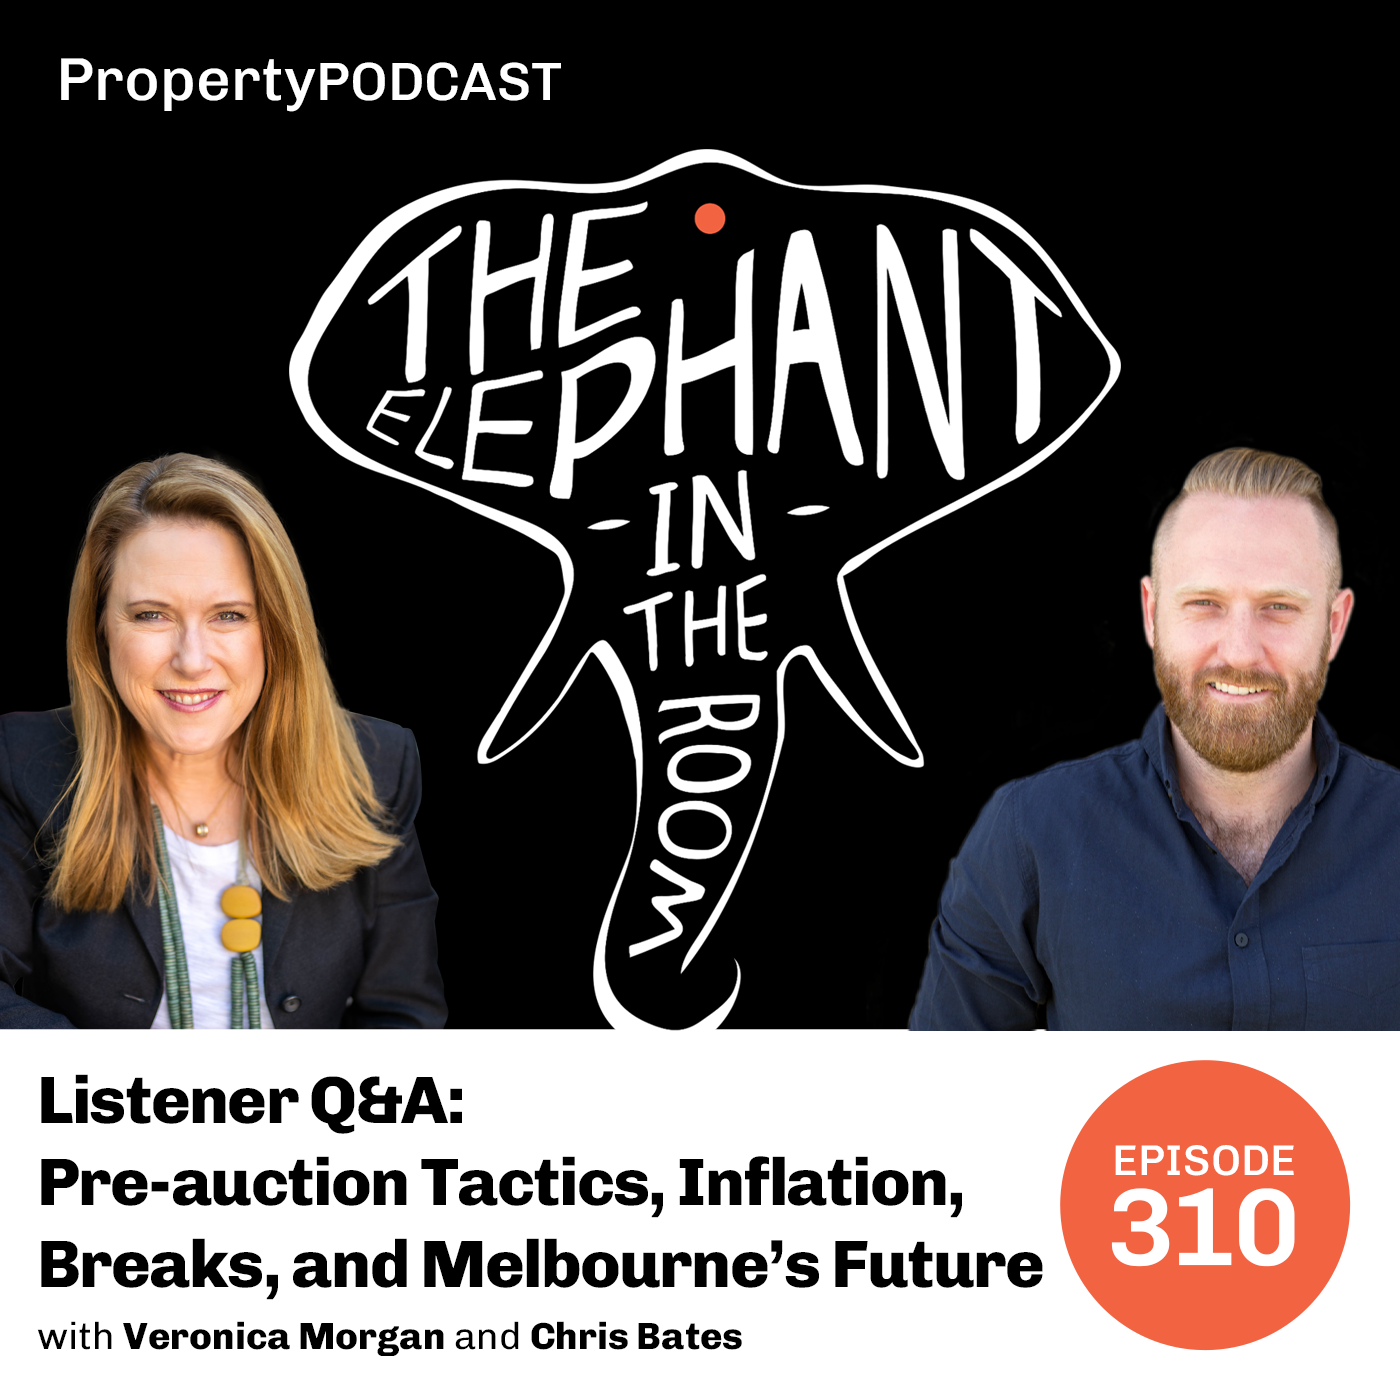 Listener Q&A: Pre-auction Tactics, Inflation, Breaks, and Melbourne’s Future